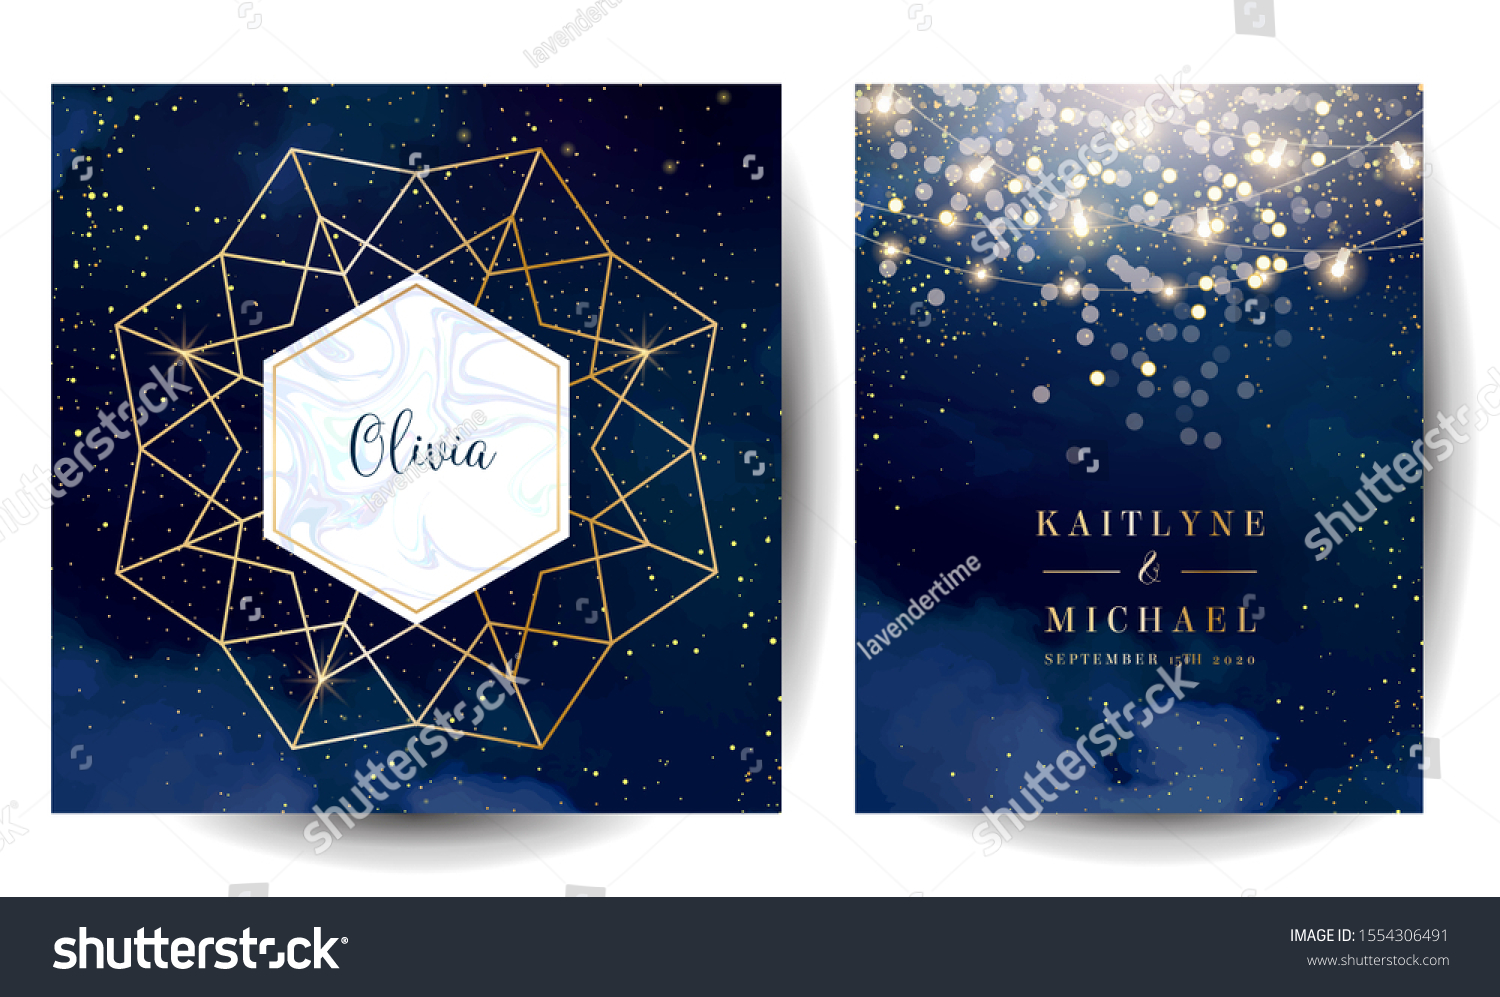 Magic night dark blue cards with sparkling glitter bokeh and line art. Diamond shaped vector wedding invitation. Gold confetti and navy background. Golden scattered dust.Fairytale magic star templates #1554306491